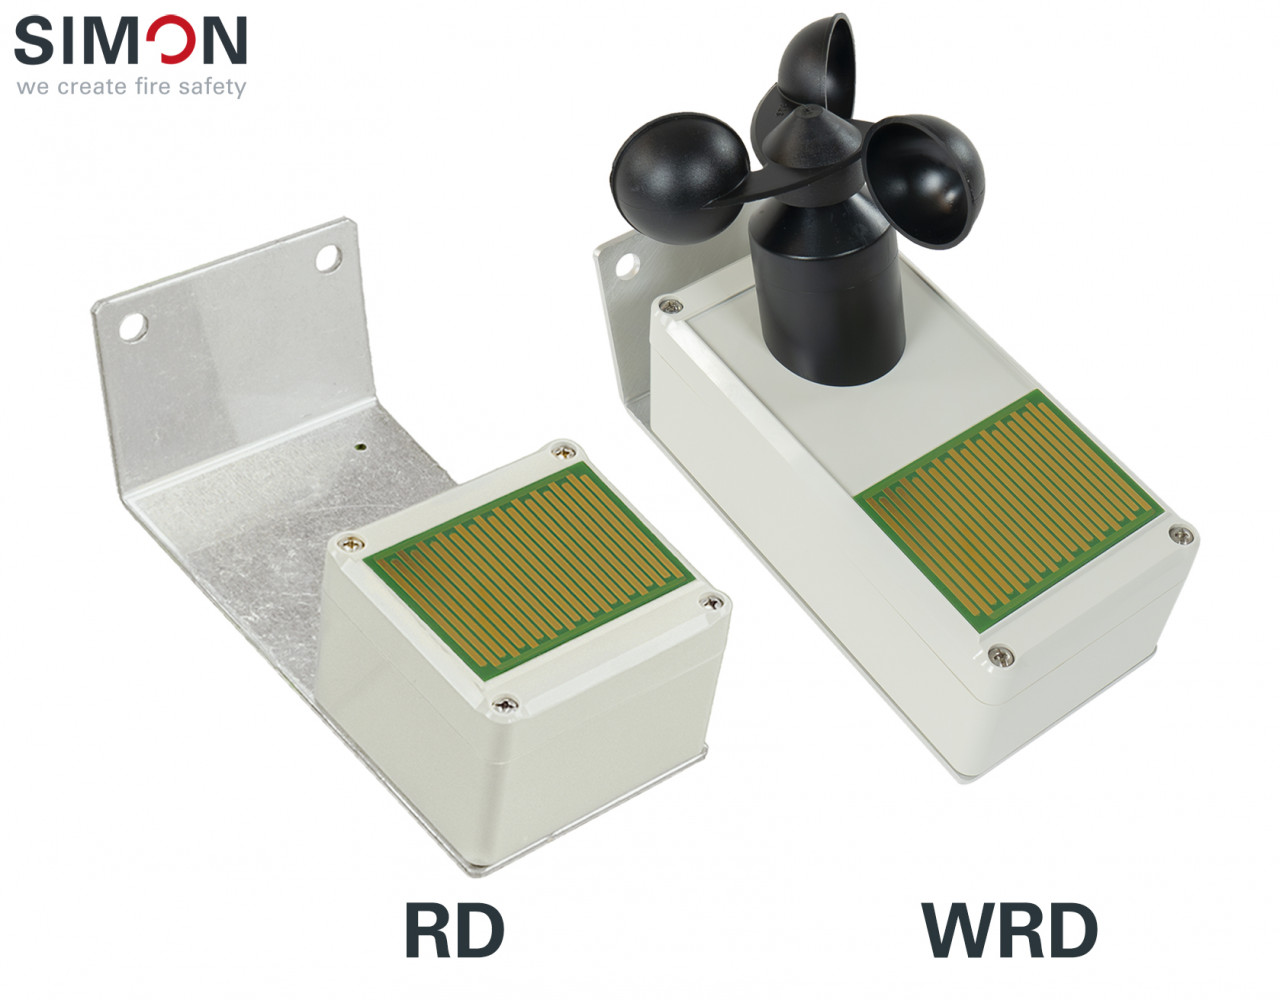 We won't leave you out in the rain: Wind-rain detector WRD and rain detector RD